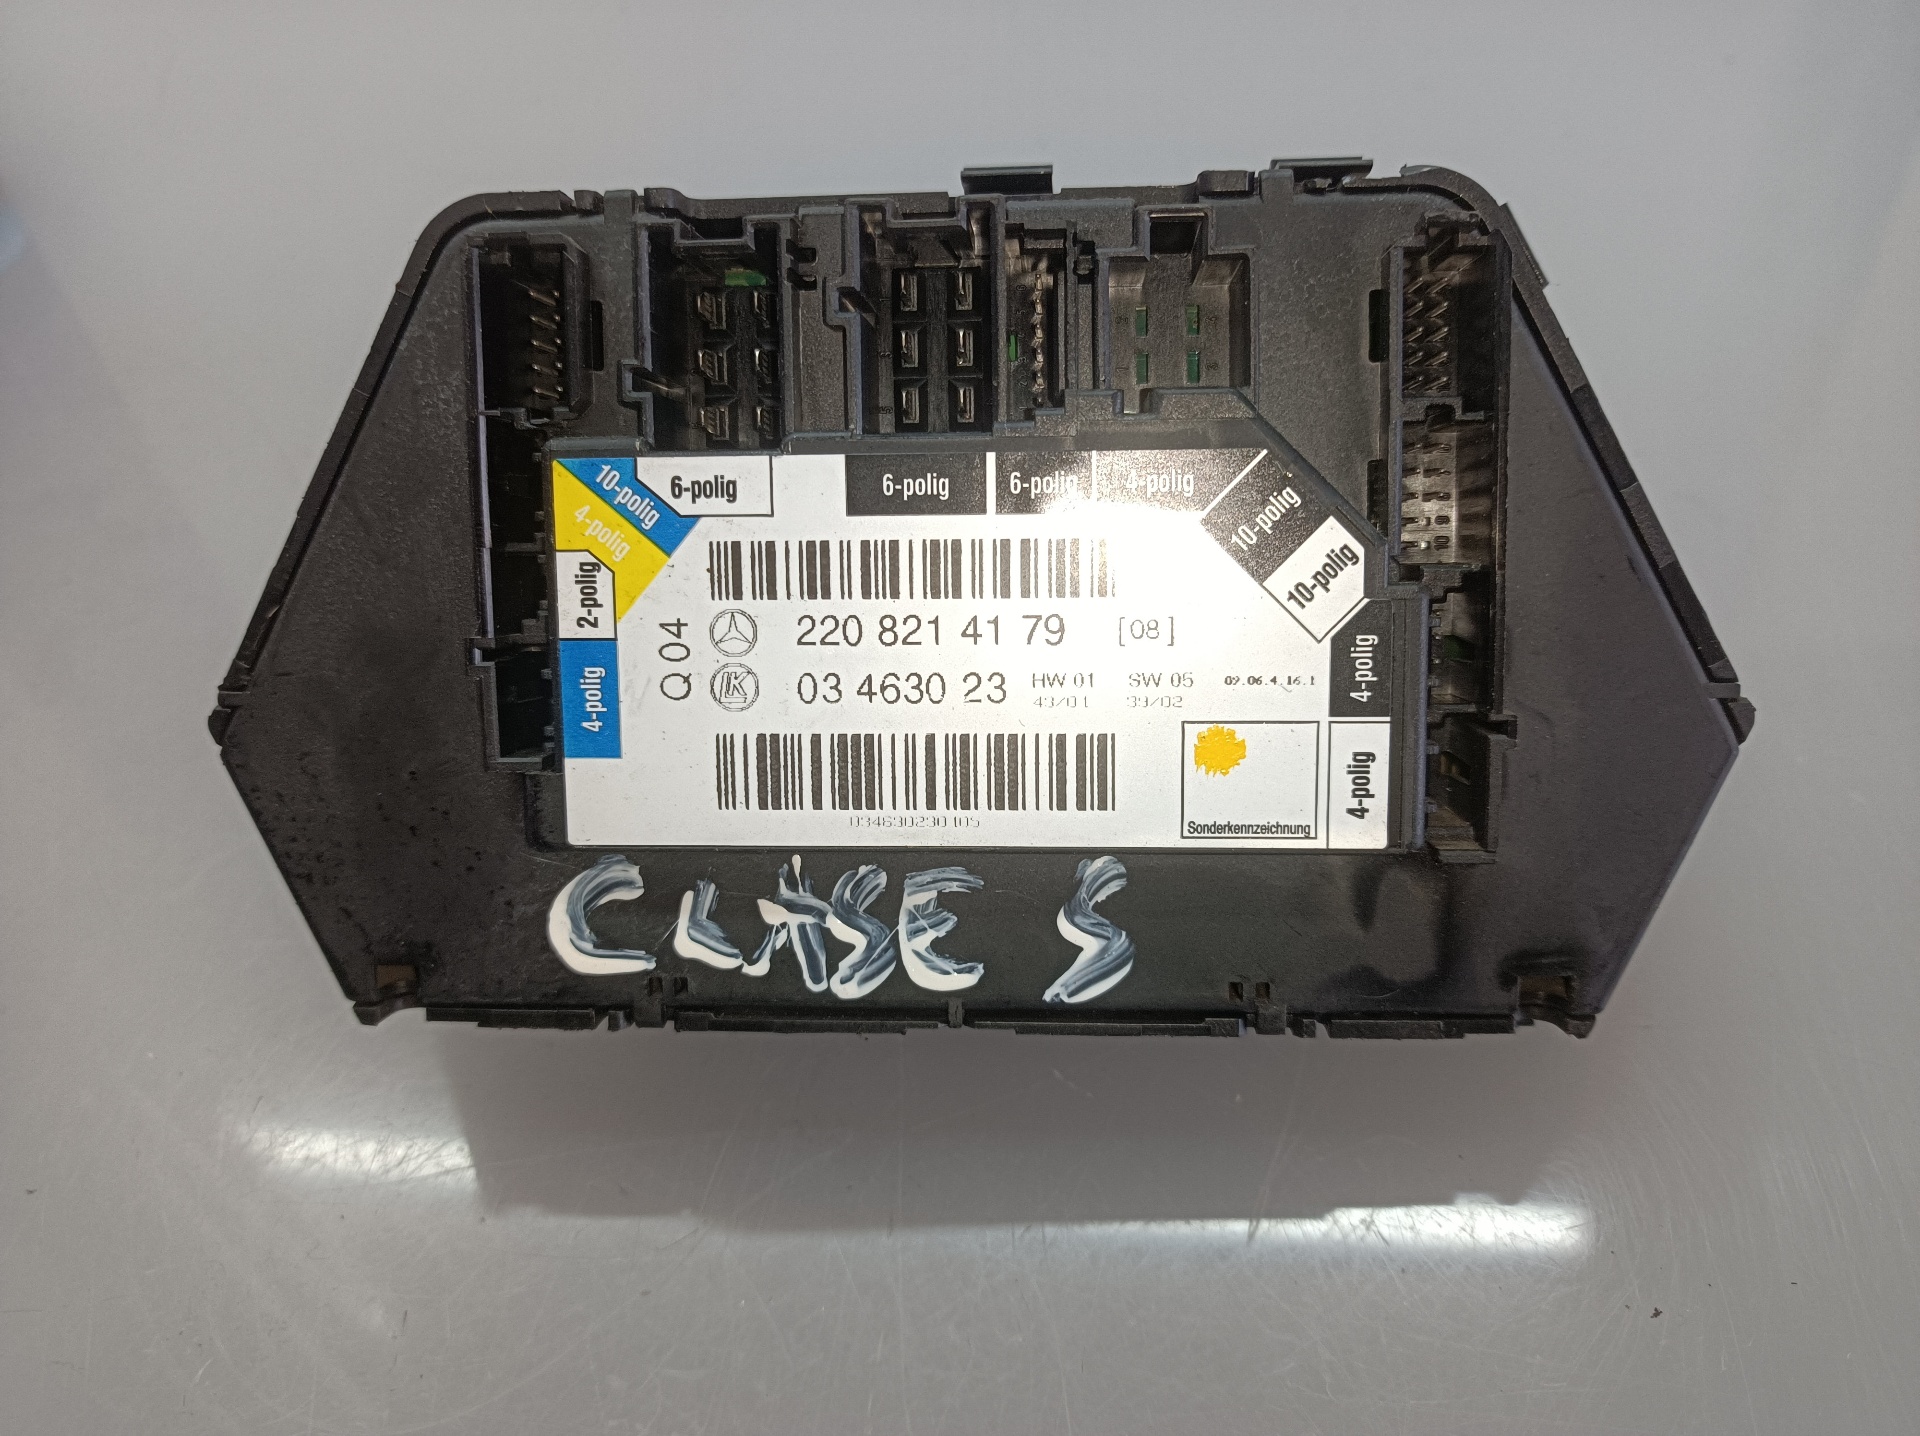 MERCEDES-BENZ S-Class W220 (1998-2005) Other Control Units 2208214179, 03463023 24552000